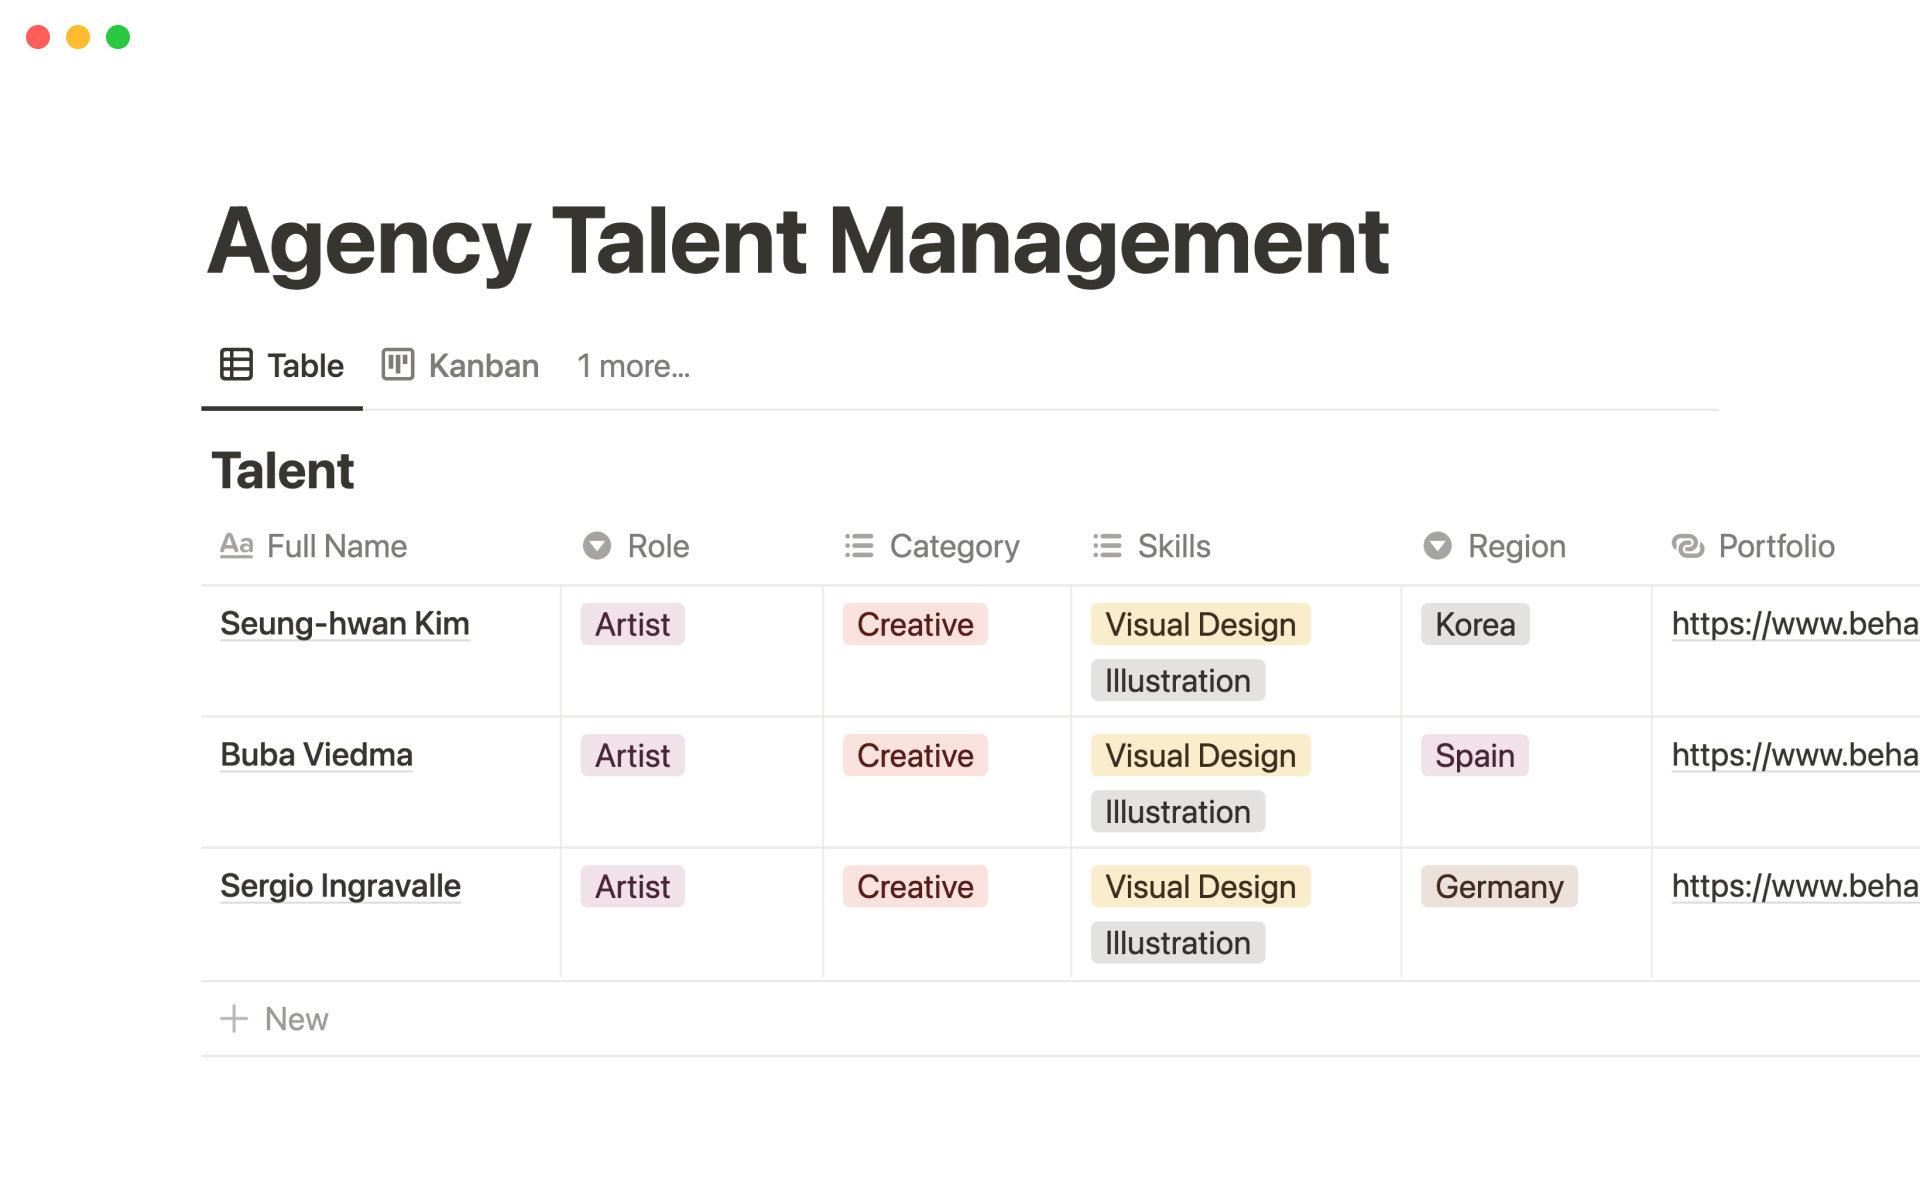 This template is perfect for keeping an internal directory/CRM of your talent, freelancers, and contractors.